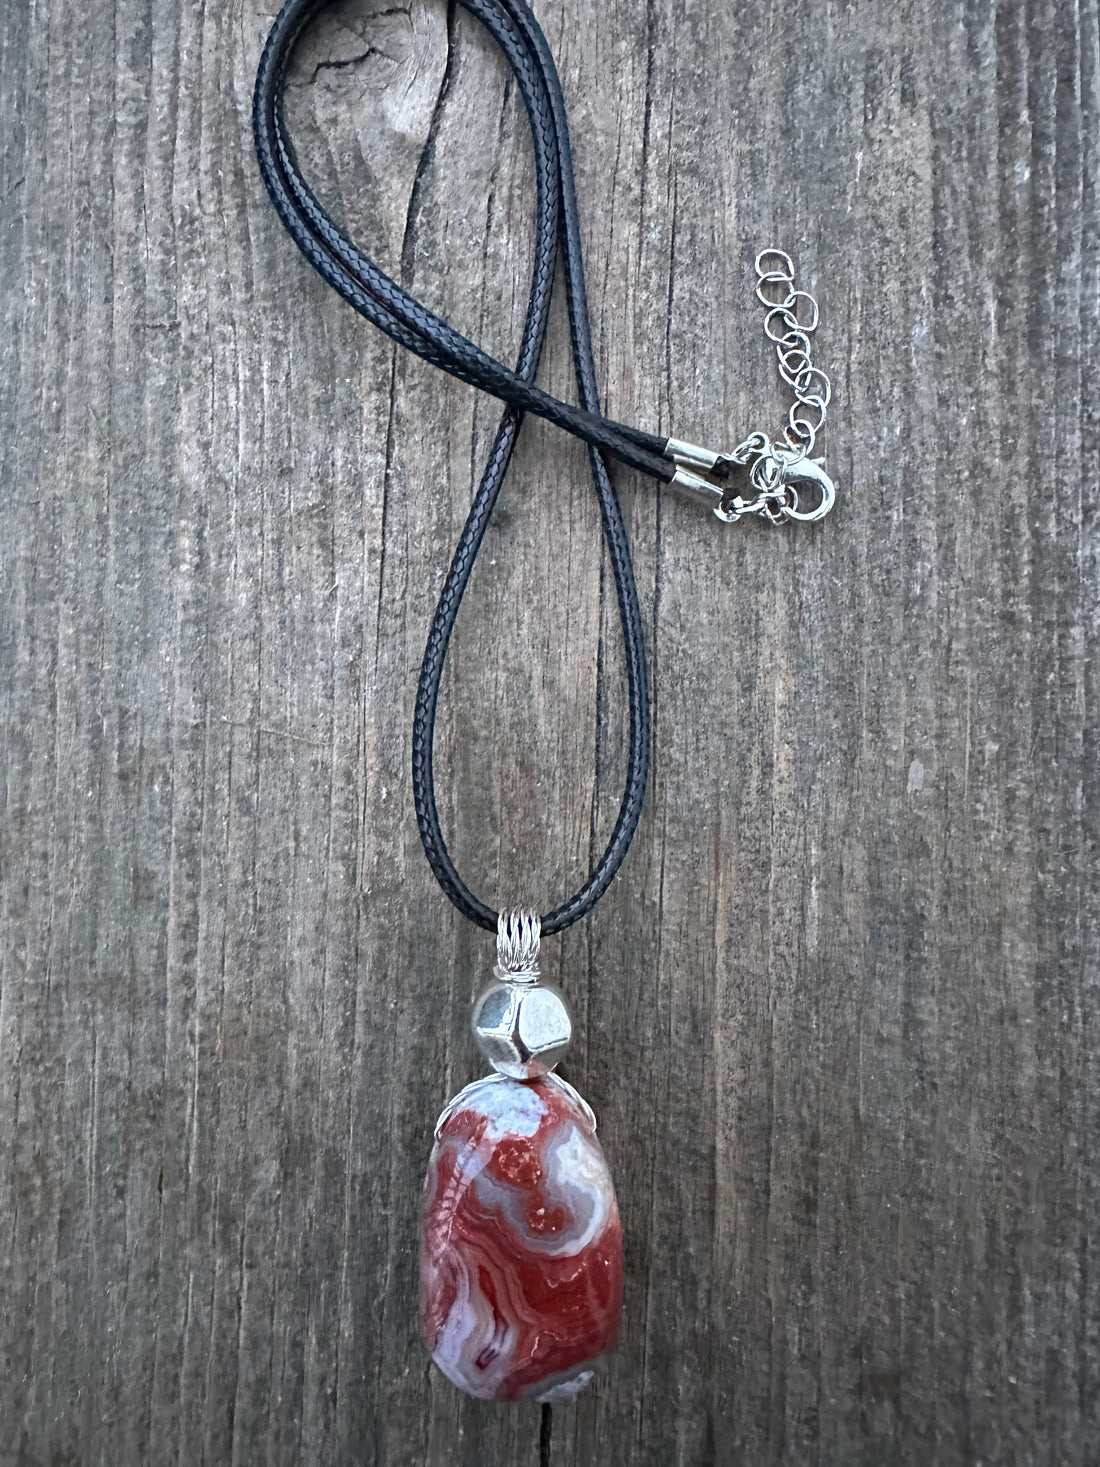 Laguna Lace Agate for Protection, Creativity and Root Chakra Work.